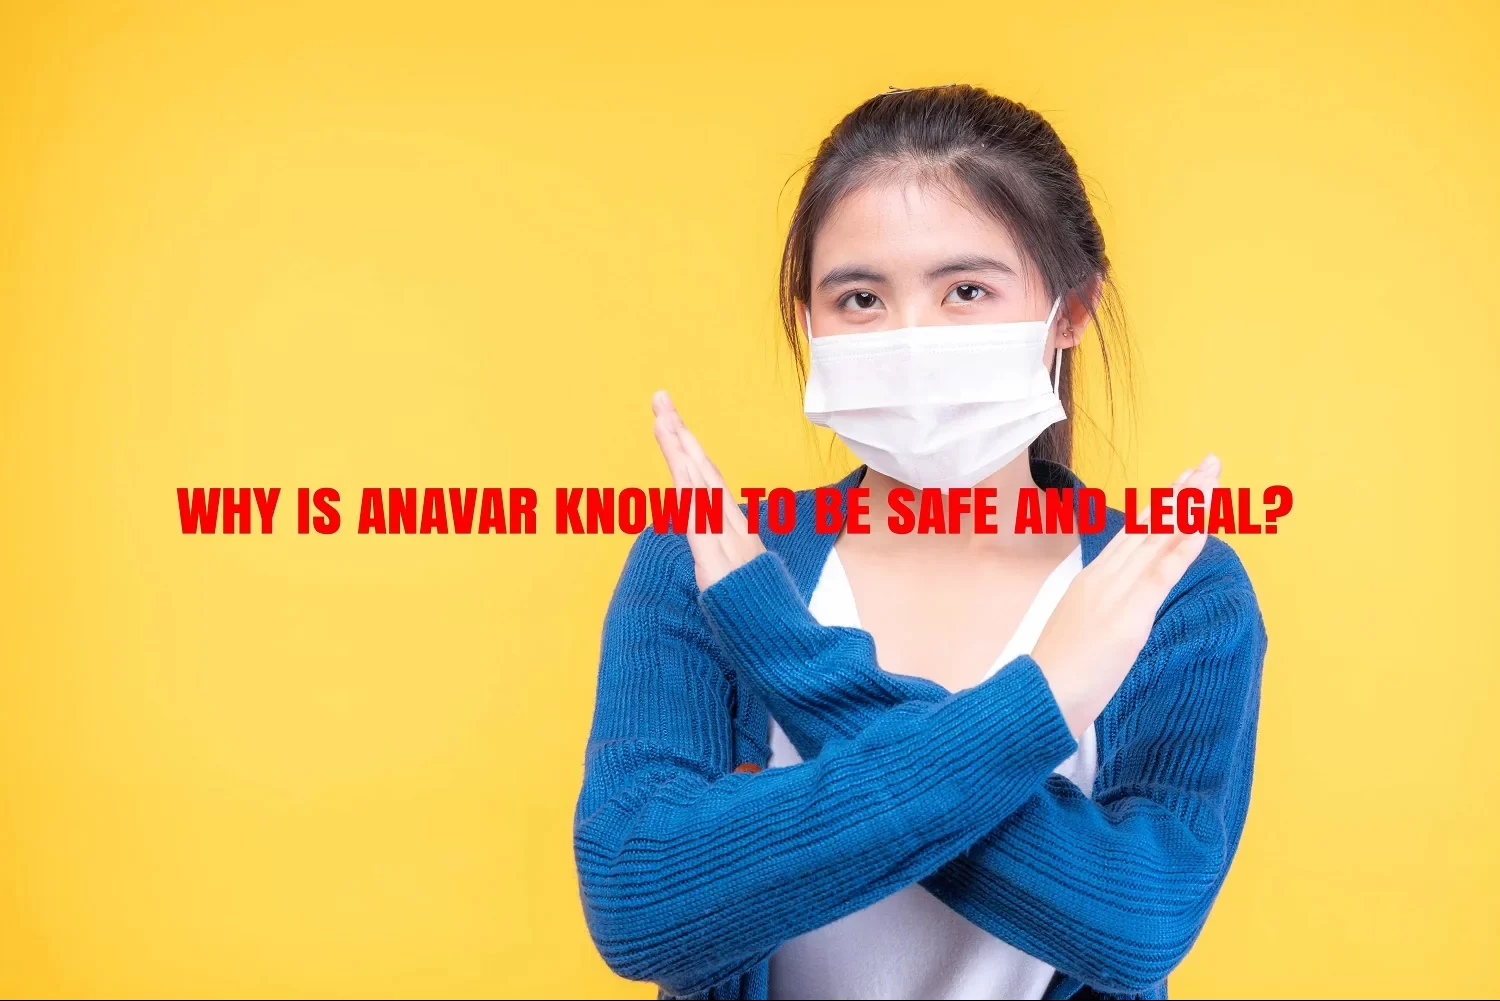 Anavar safety and legality